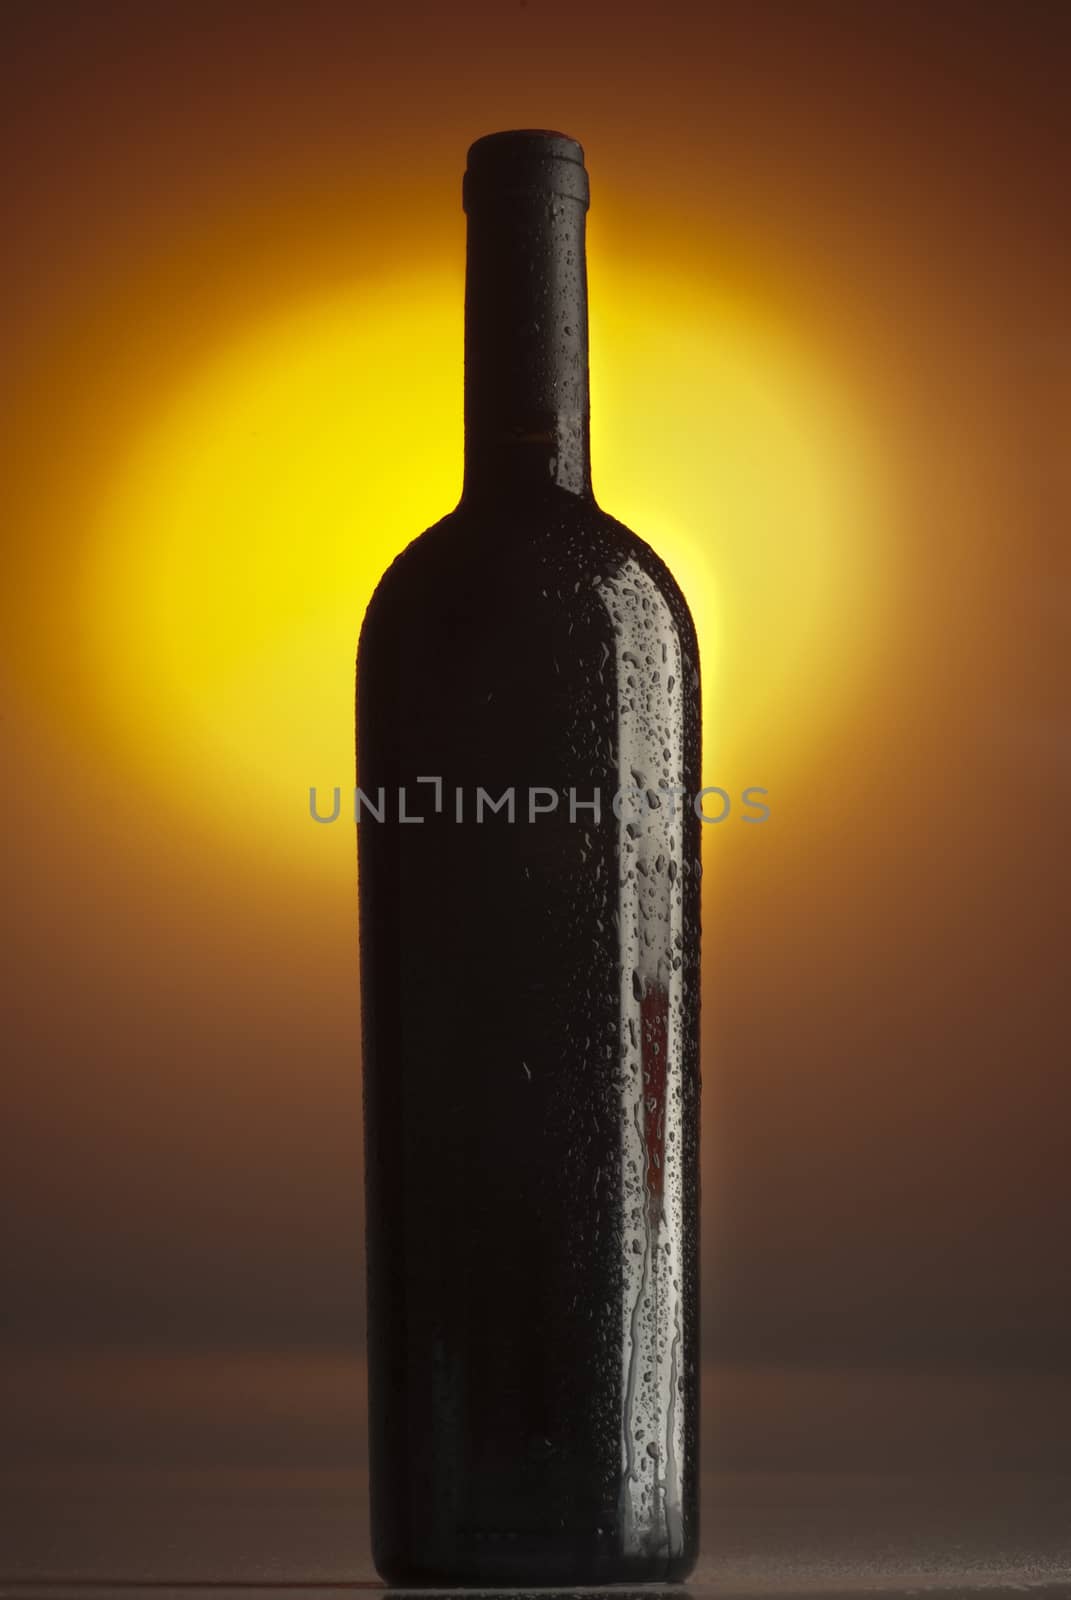 Bottle of wine, reflection of a glass of wine, red wine, drops